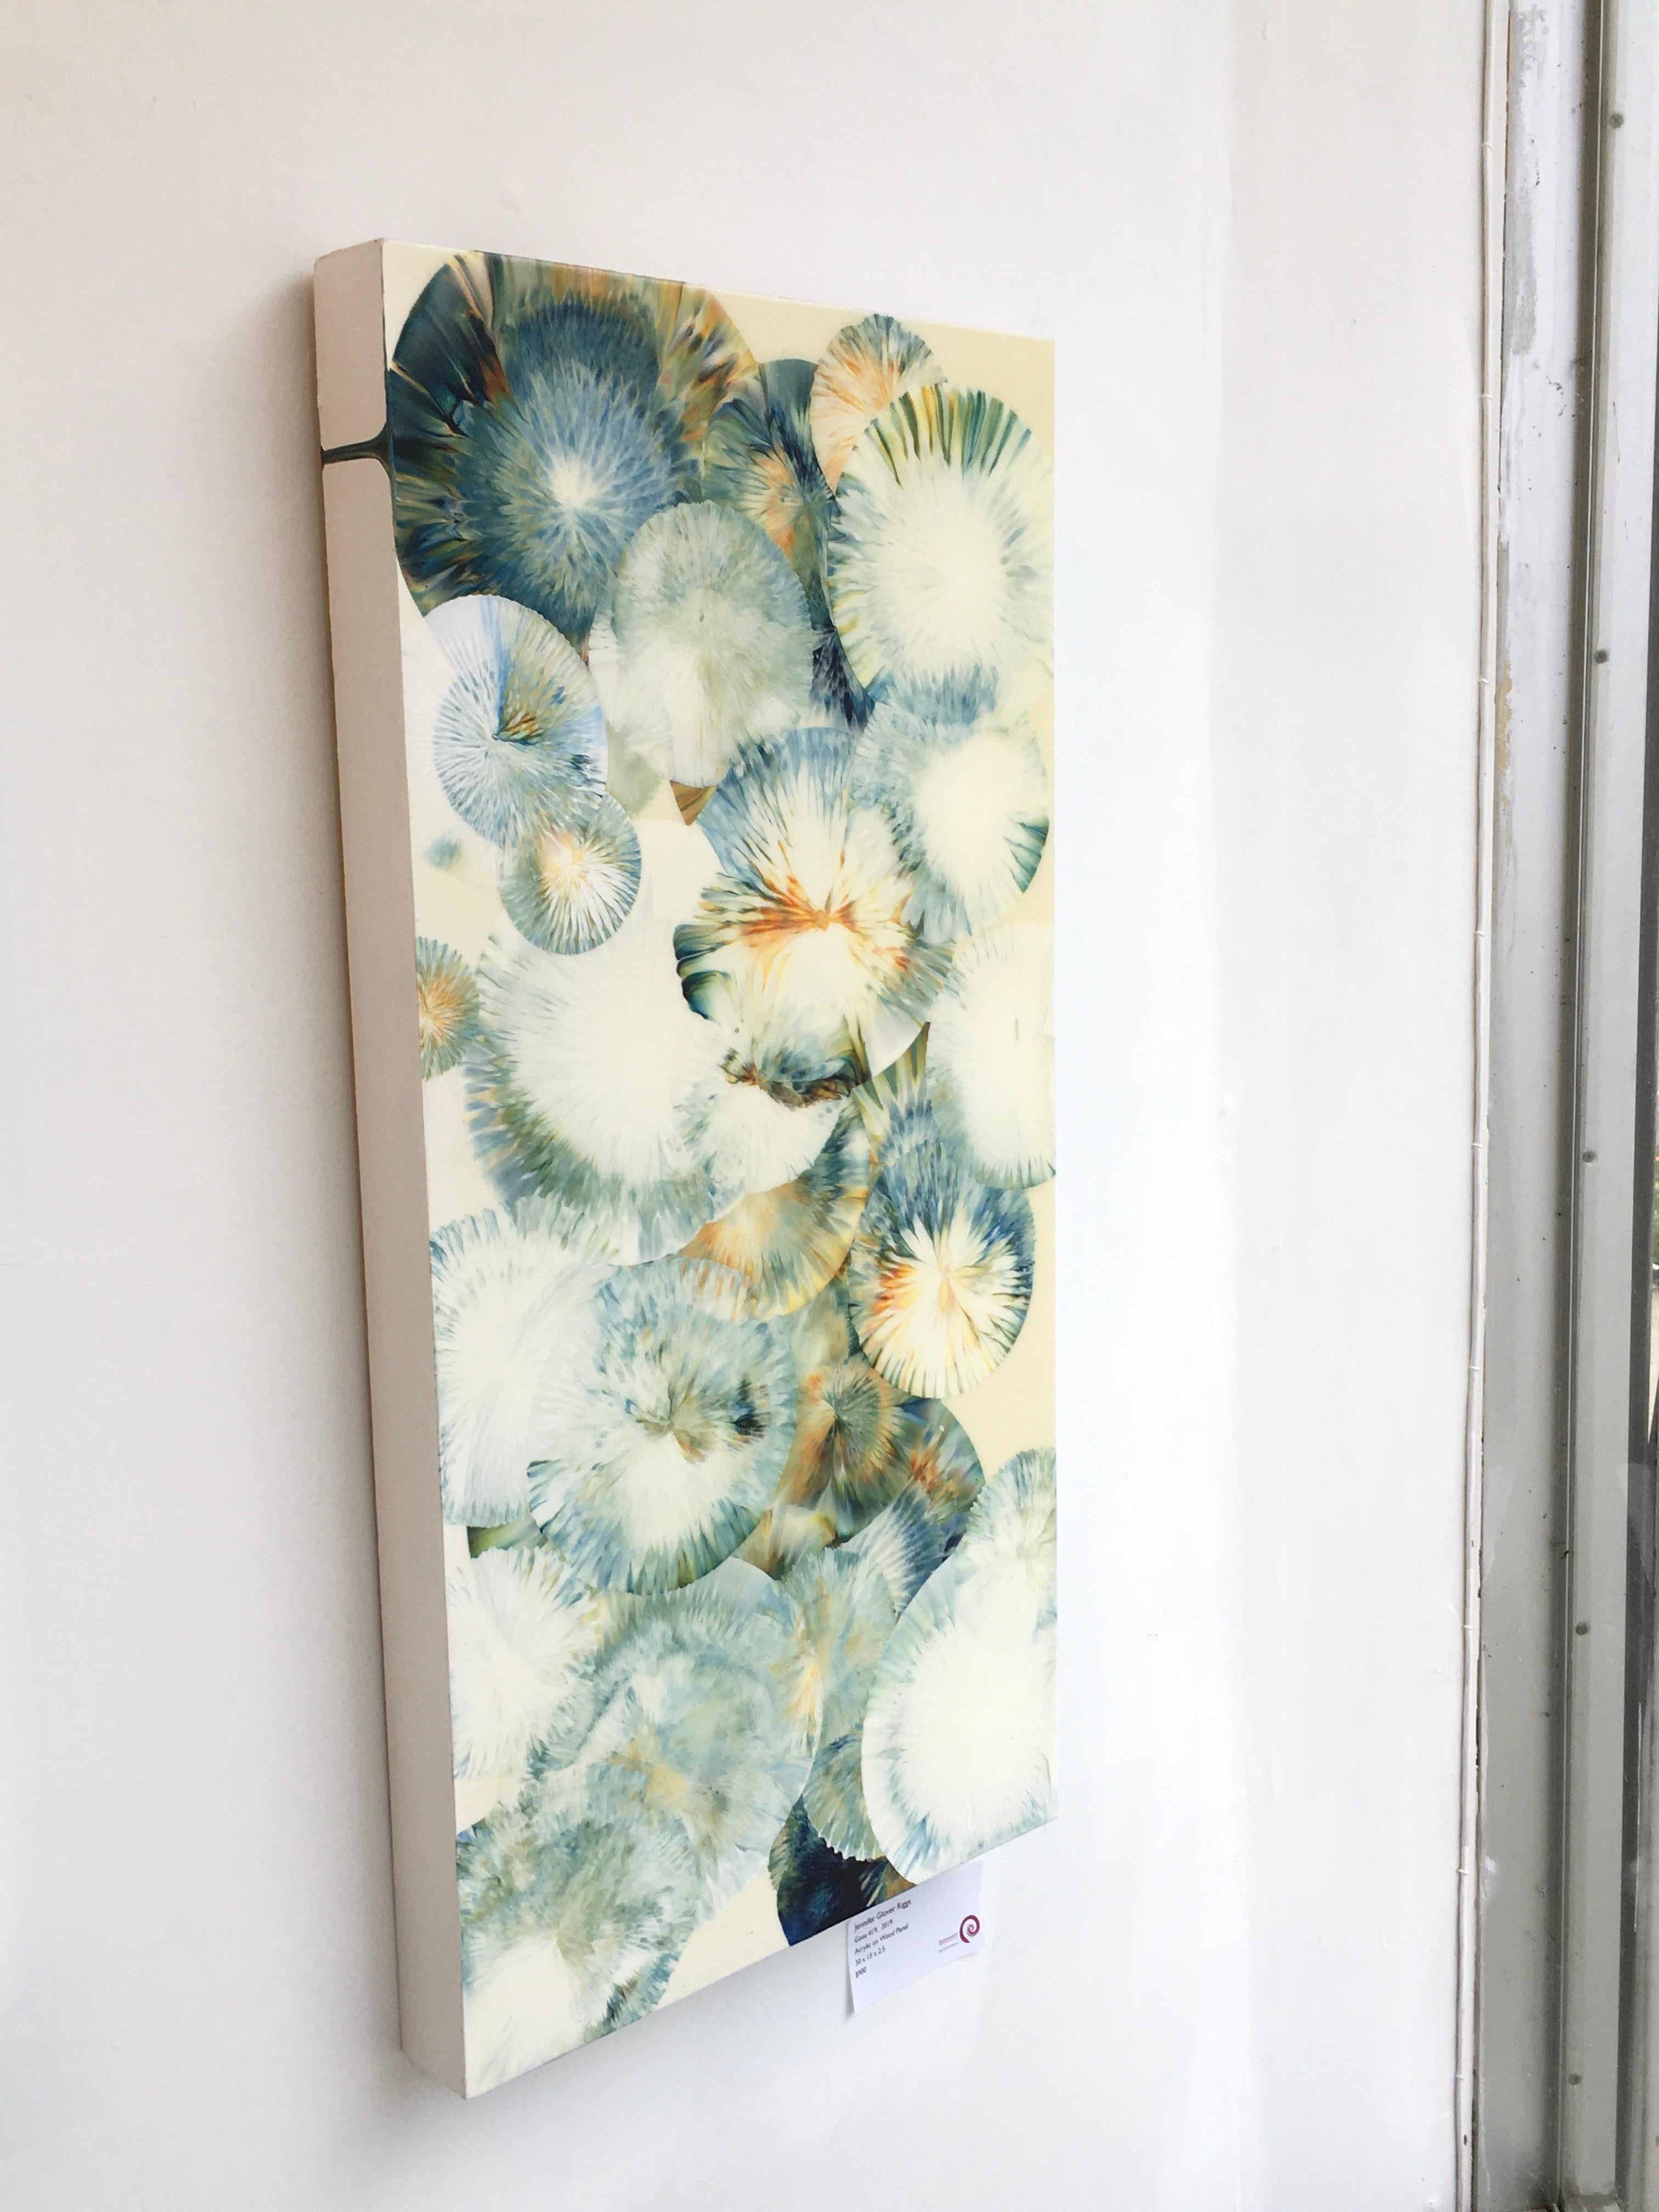 Gaea No 19 by Jennifer Glover Riggs is an acrylic painting with a varnish on Wood.  It is 30 x 15 x 2.5 and can be hung vertically or horizontally.  It has a dynamic burst of color and movement.

Glover Riggs is best known for creating organic